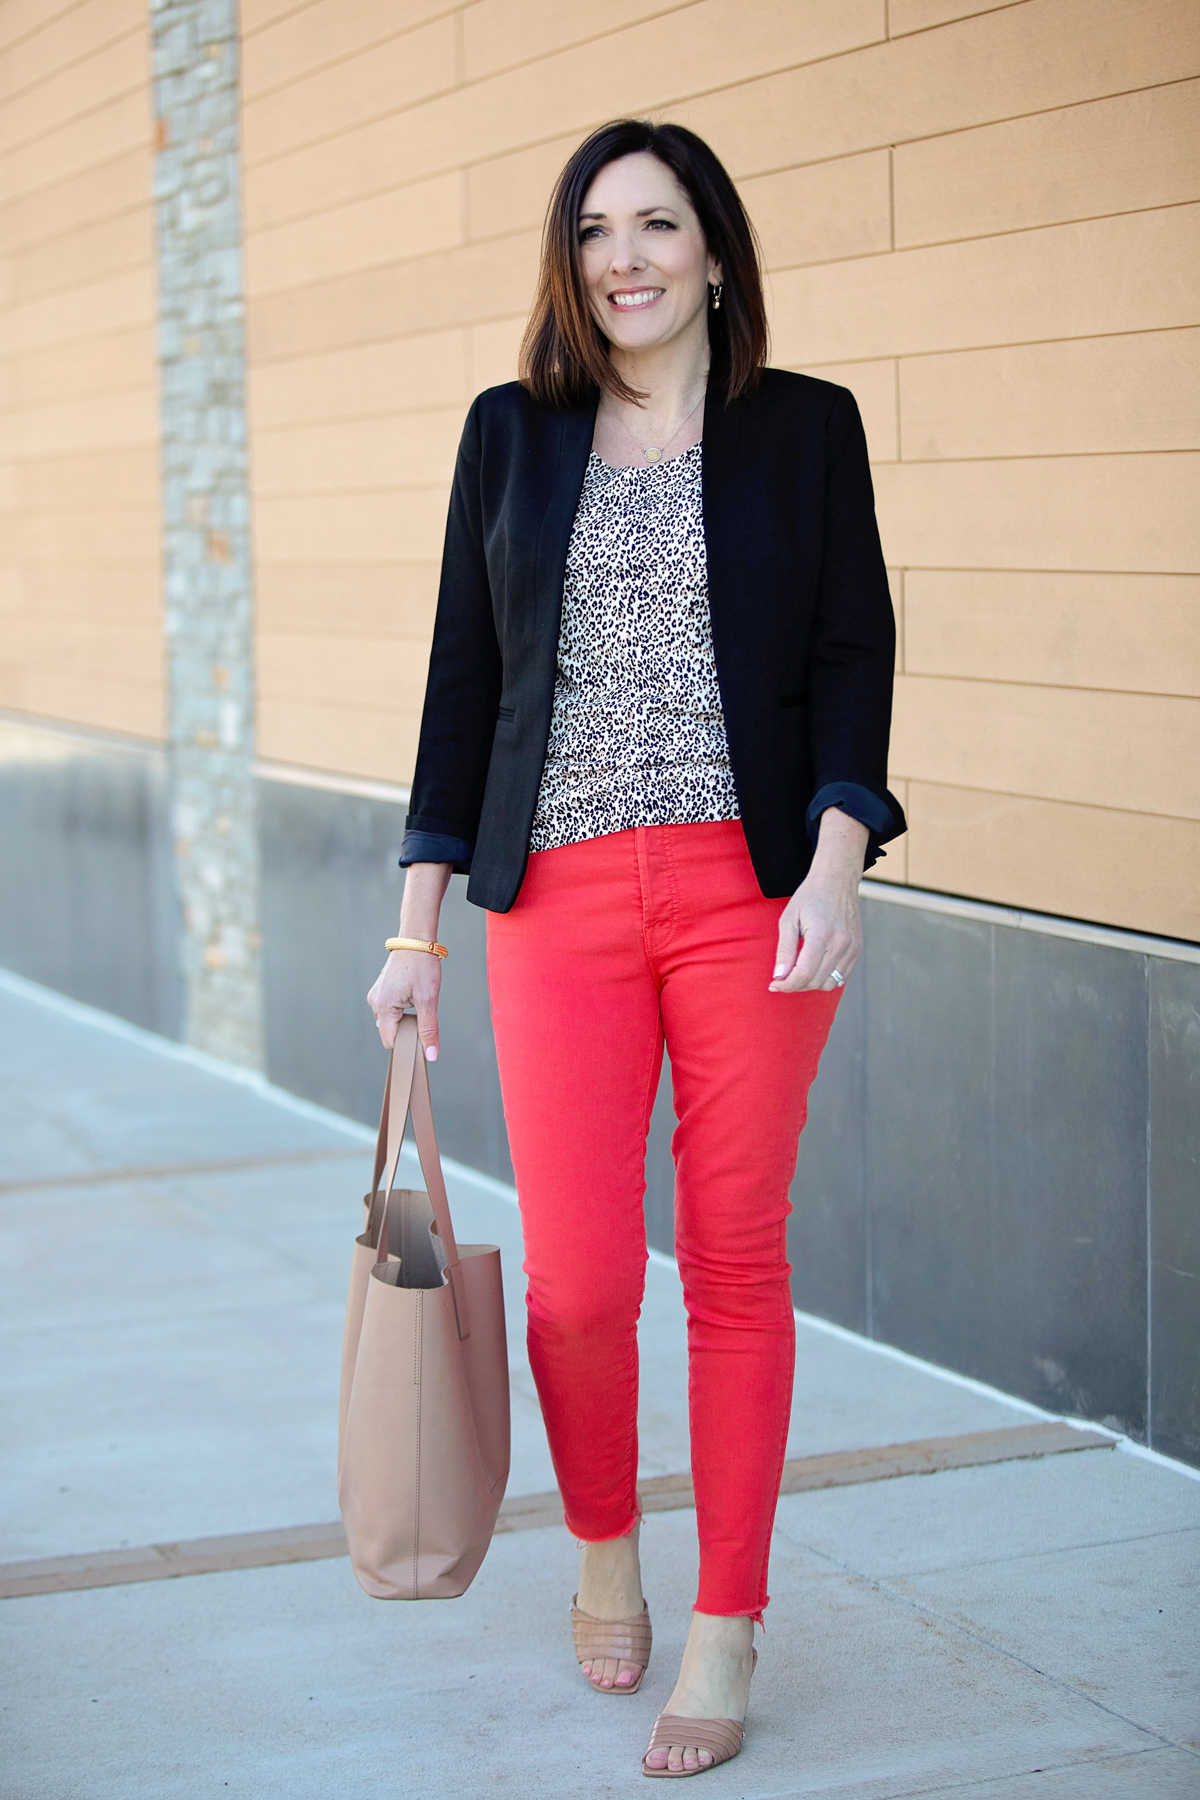 Another Fun Way to Wear Red Jeans